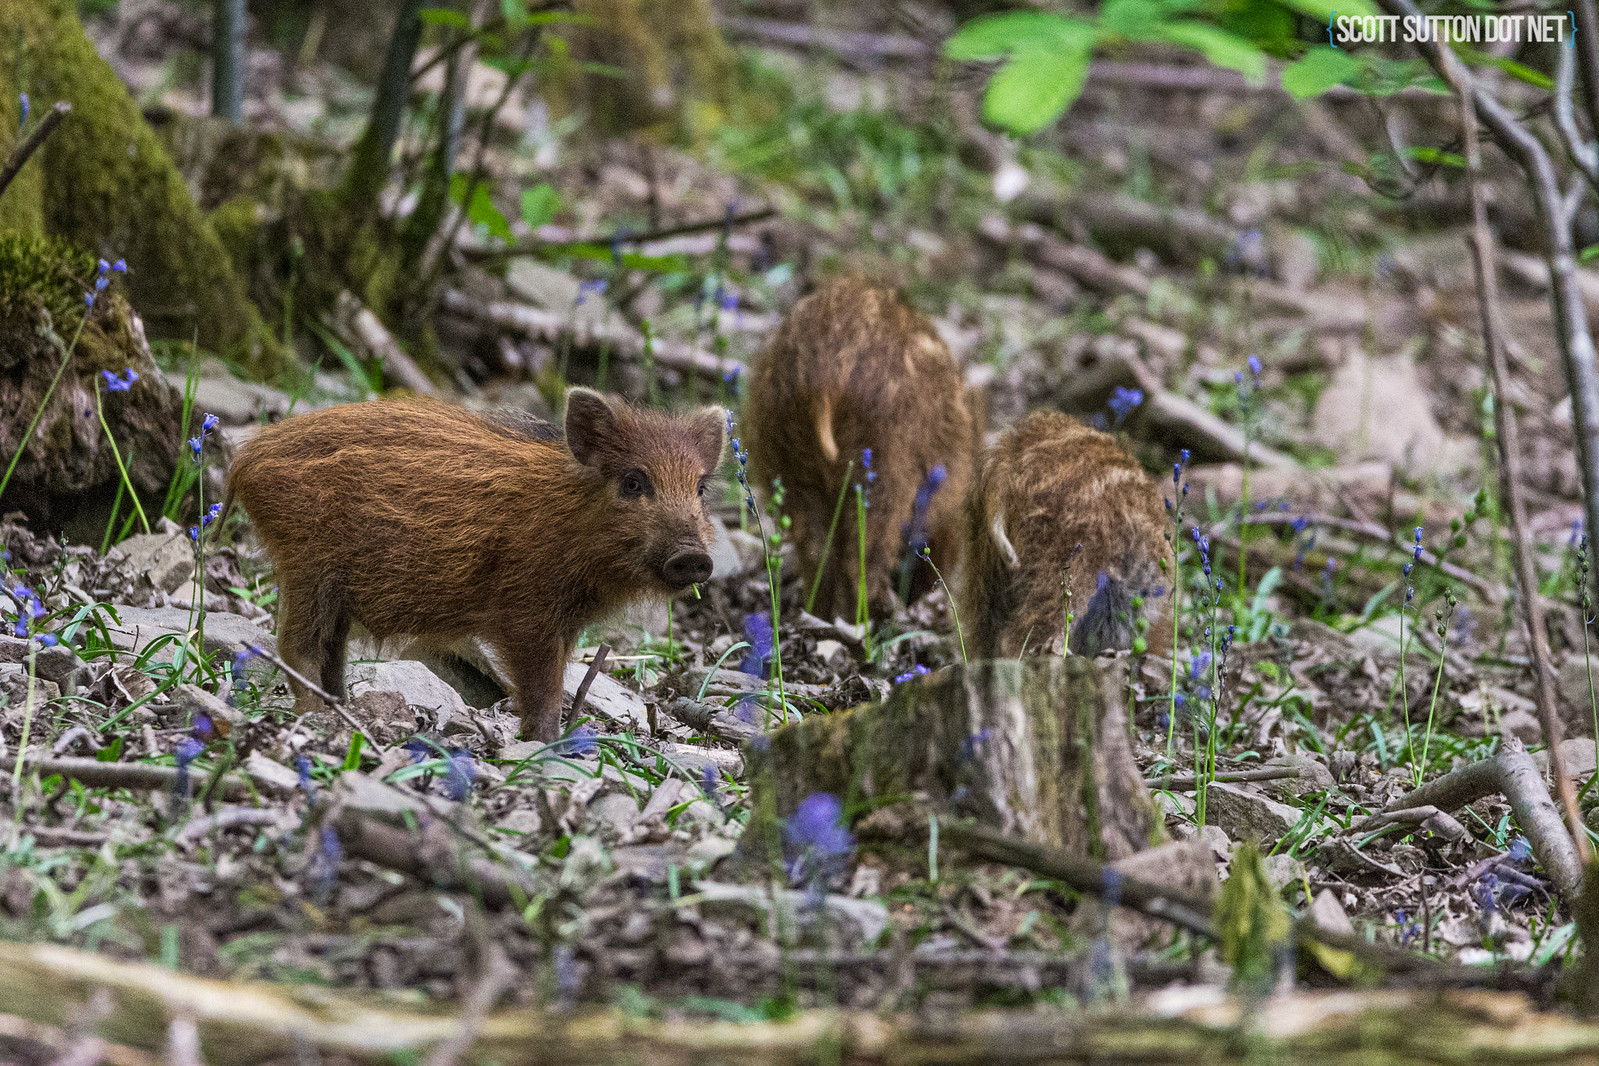 Young wild boar humbugs